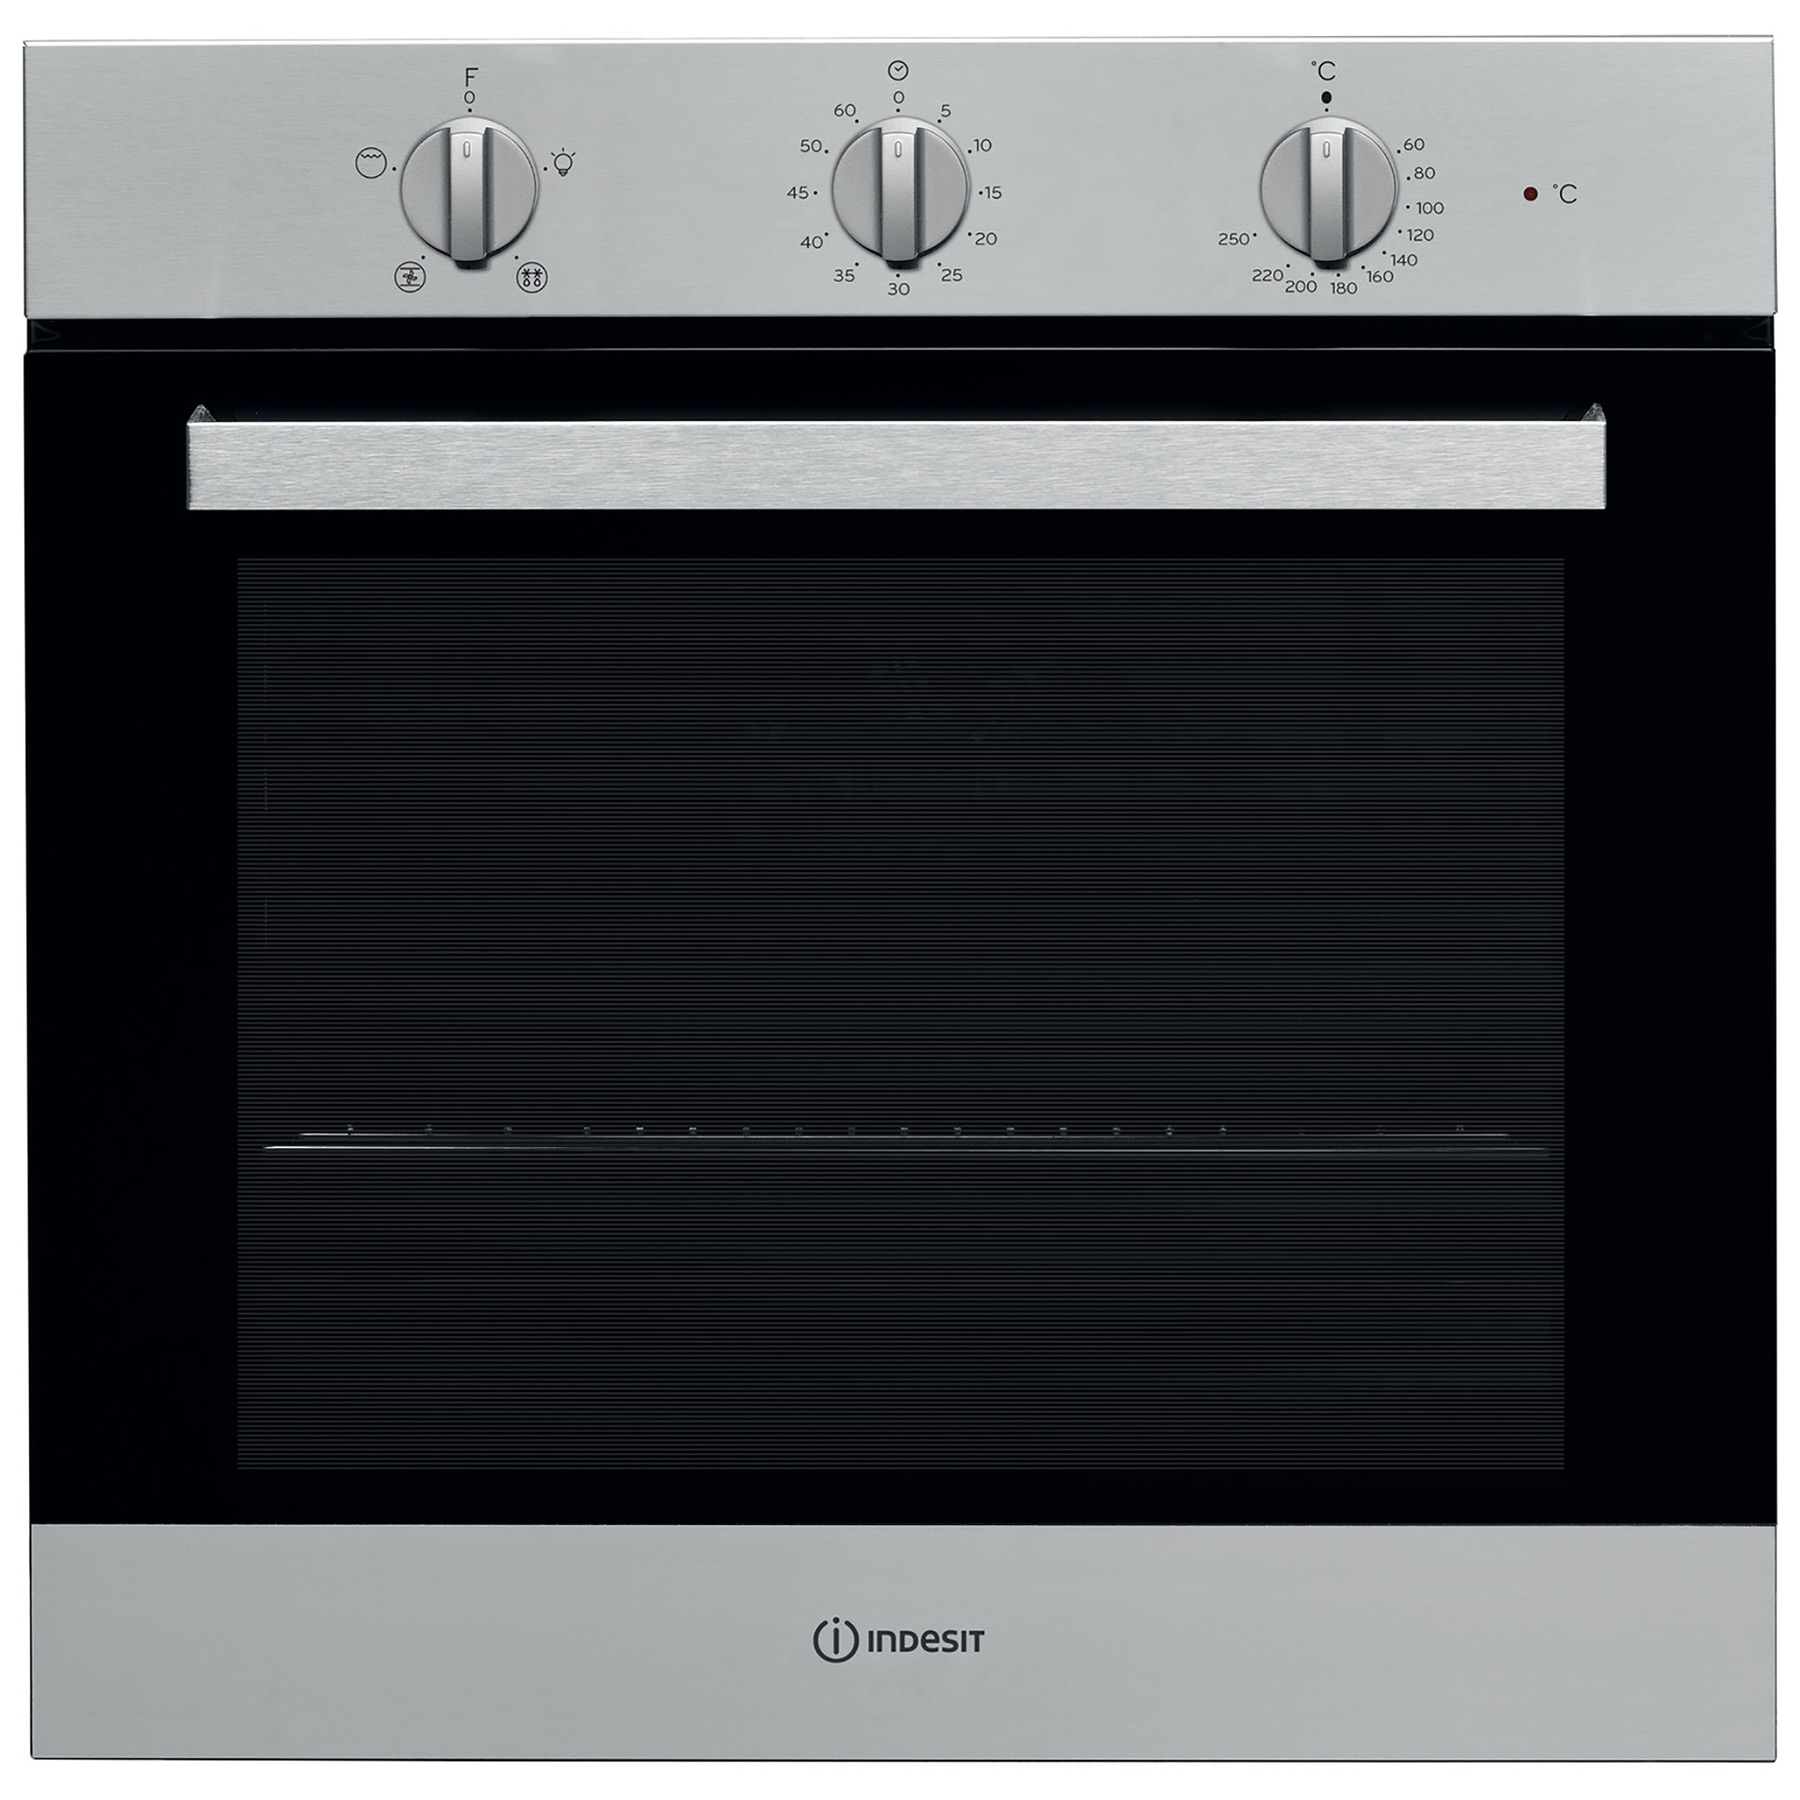 Indesit IFW6330IX Built In Electric Single Oven in St Steel 66L